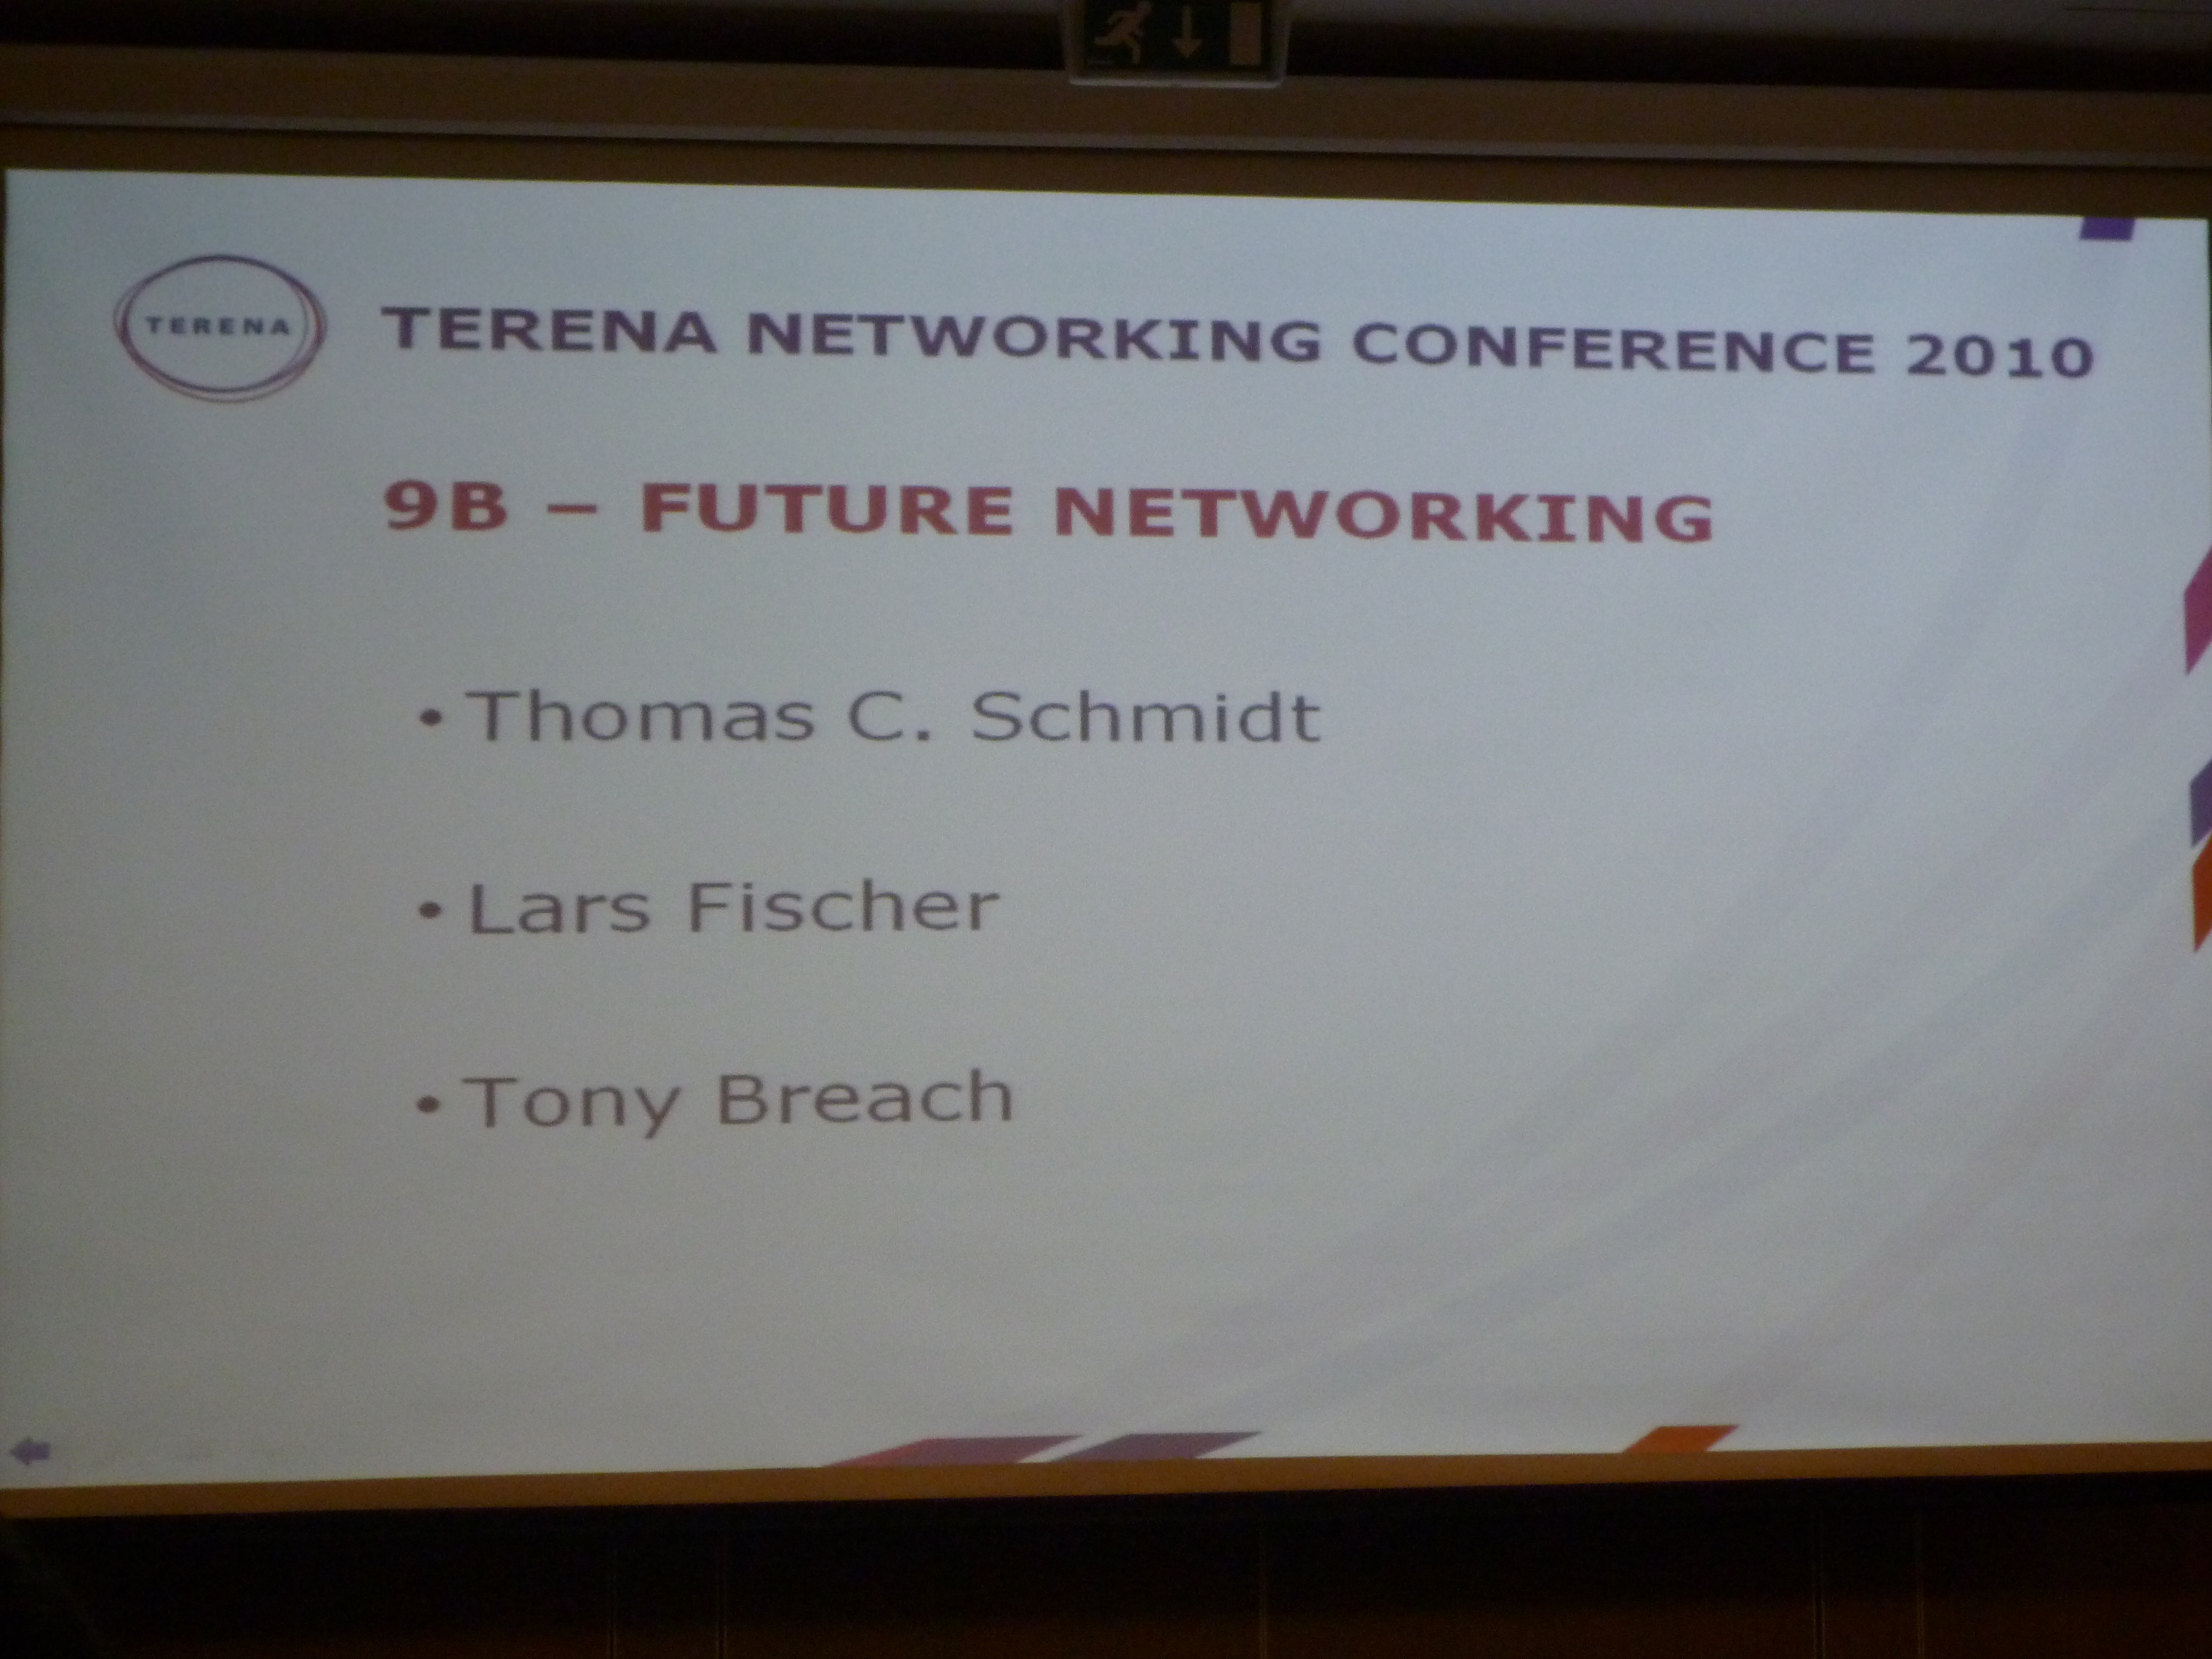 The Future networking session